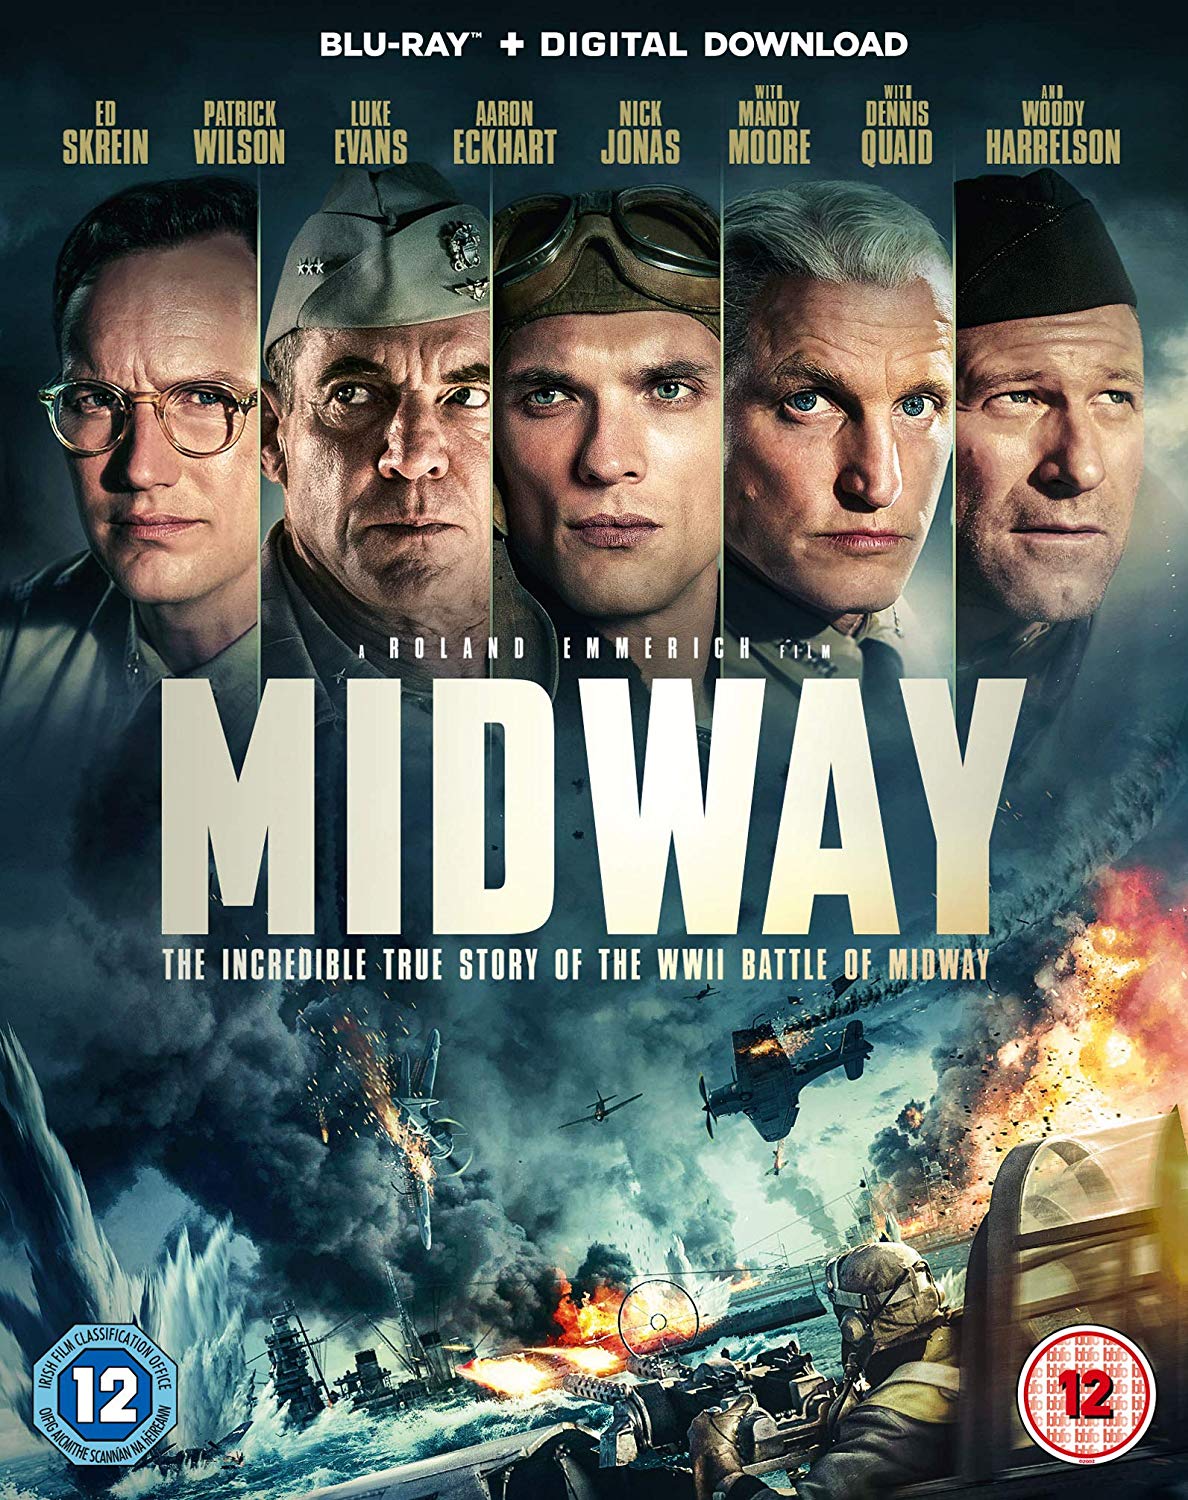 boom competitions - win Midway on Blu-ray